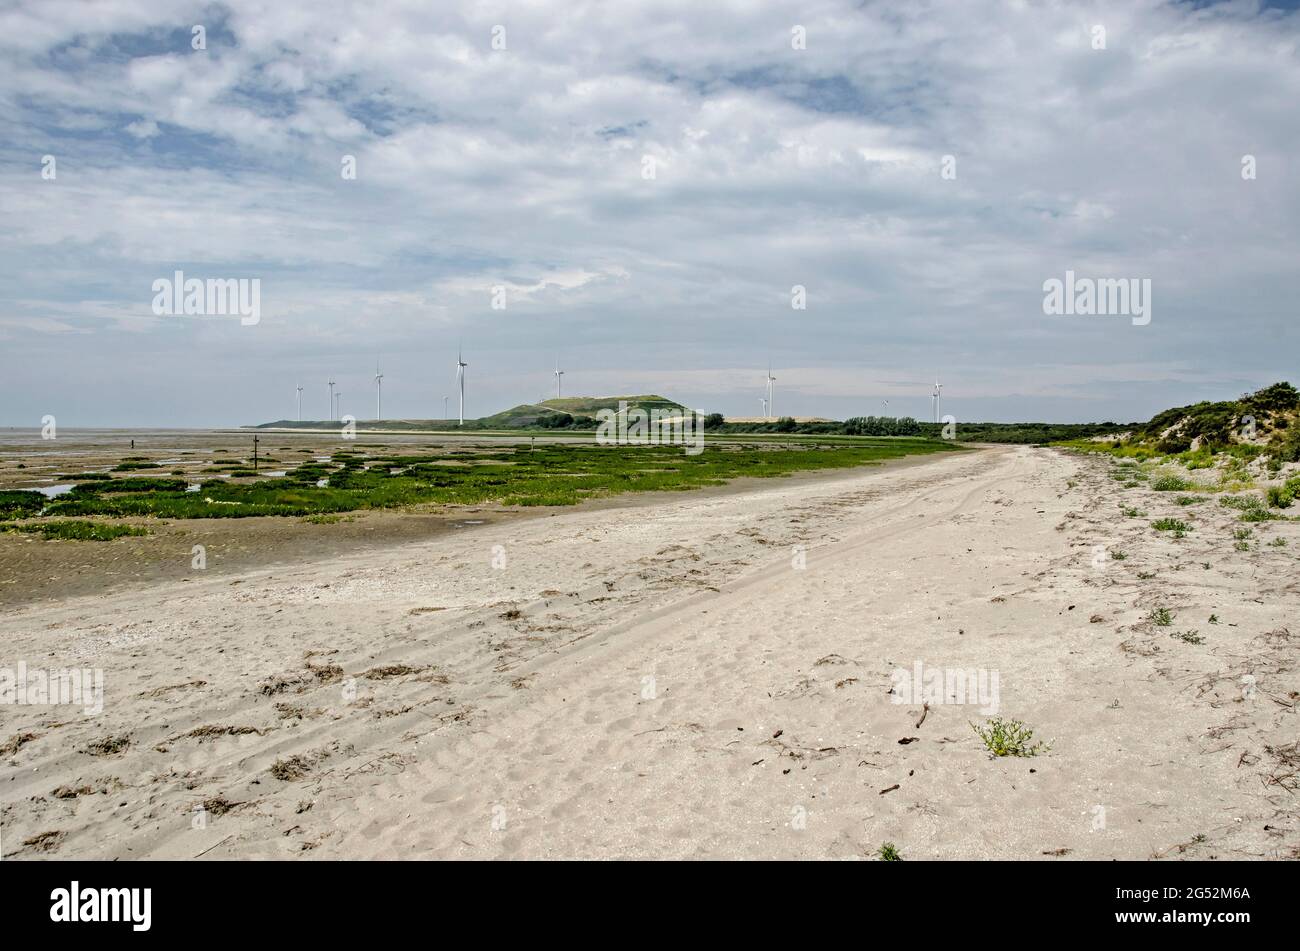 A sandy strip along the dam closing of the river Brielse Maars, a former mouth of the Rhine, near Oostvoorne, The Netherlands Stock Photo